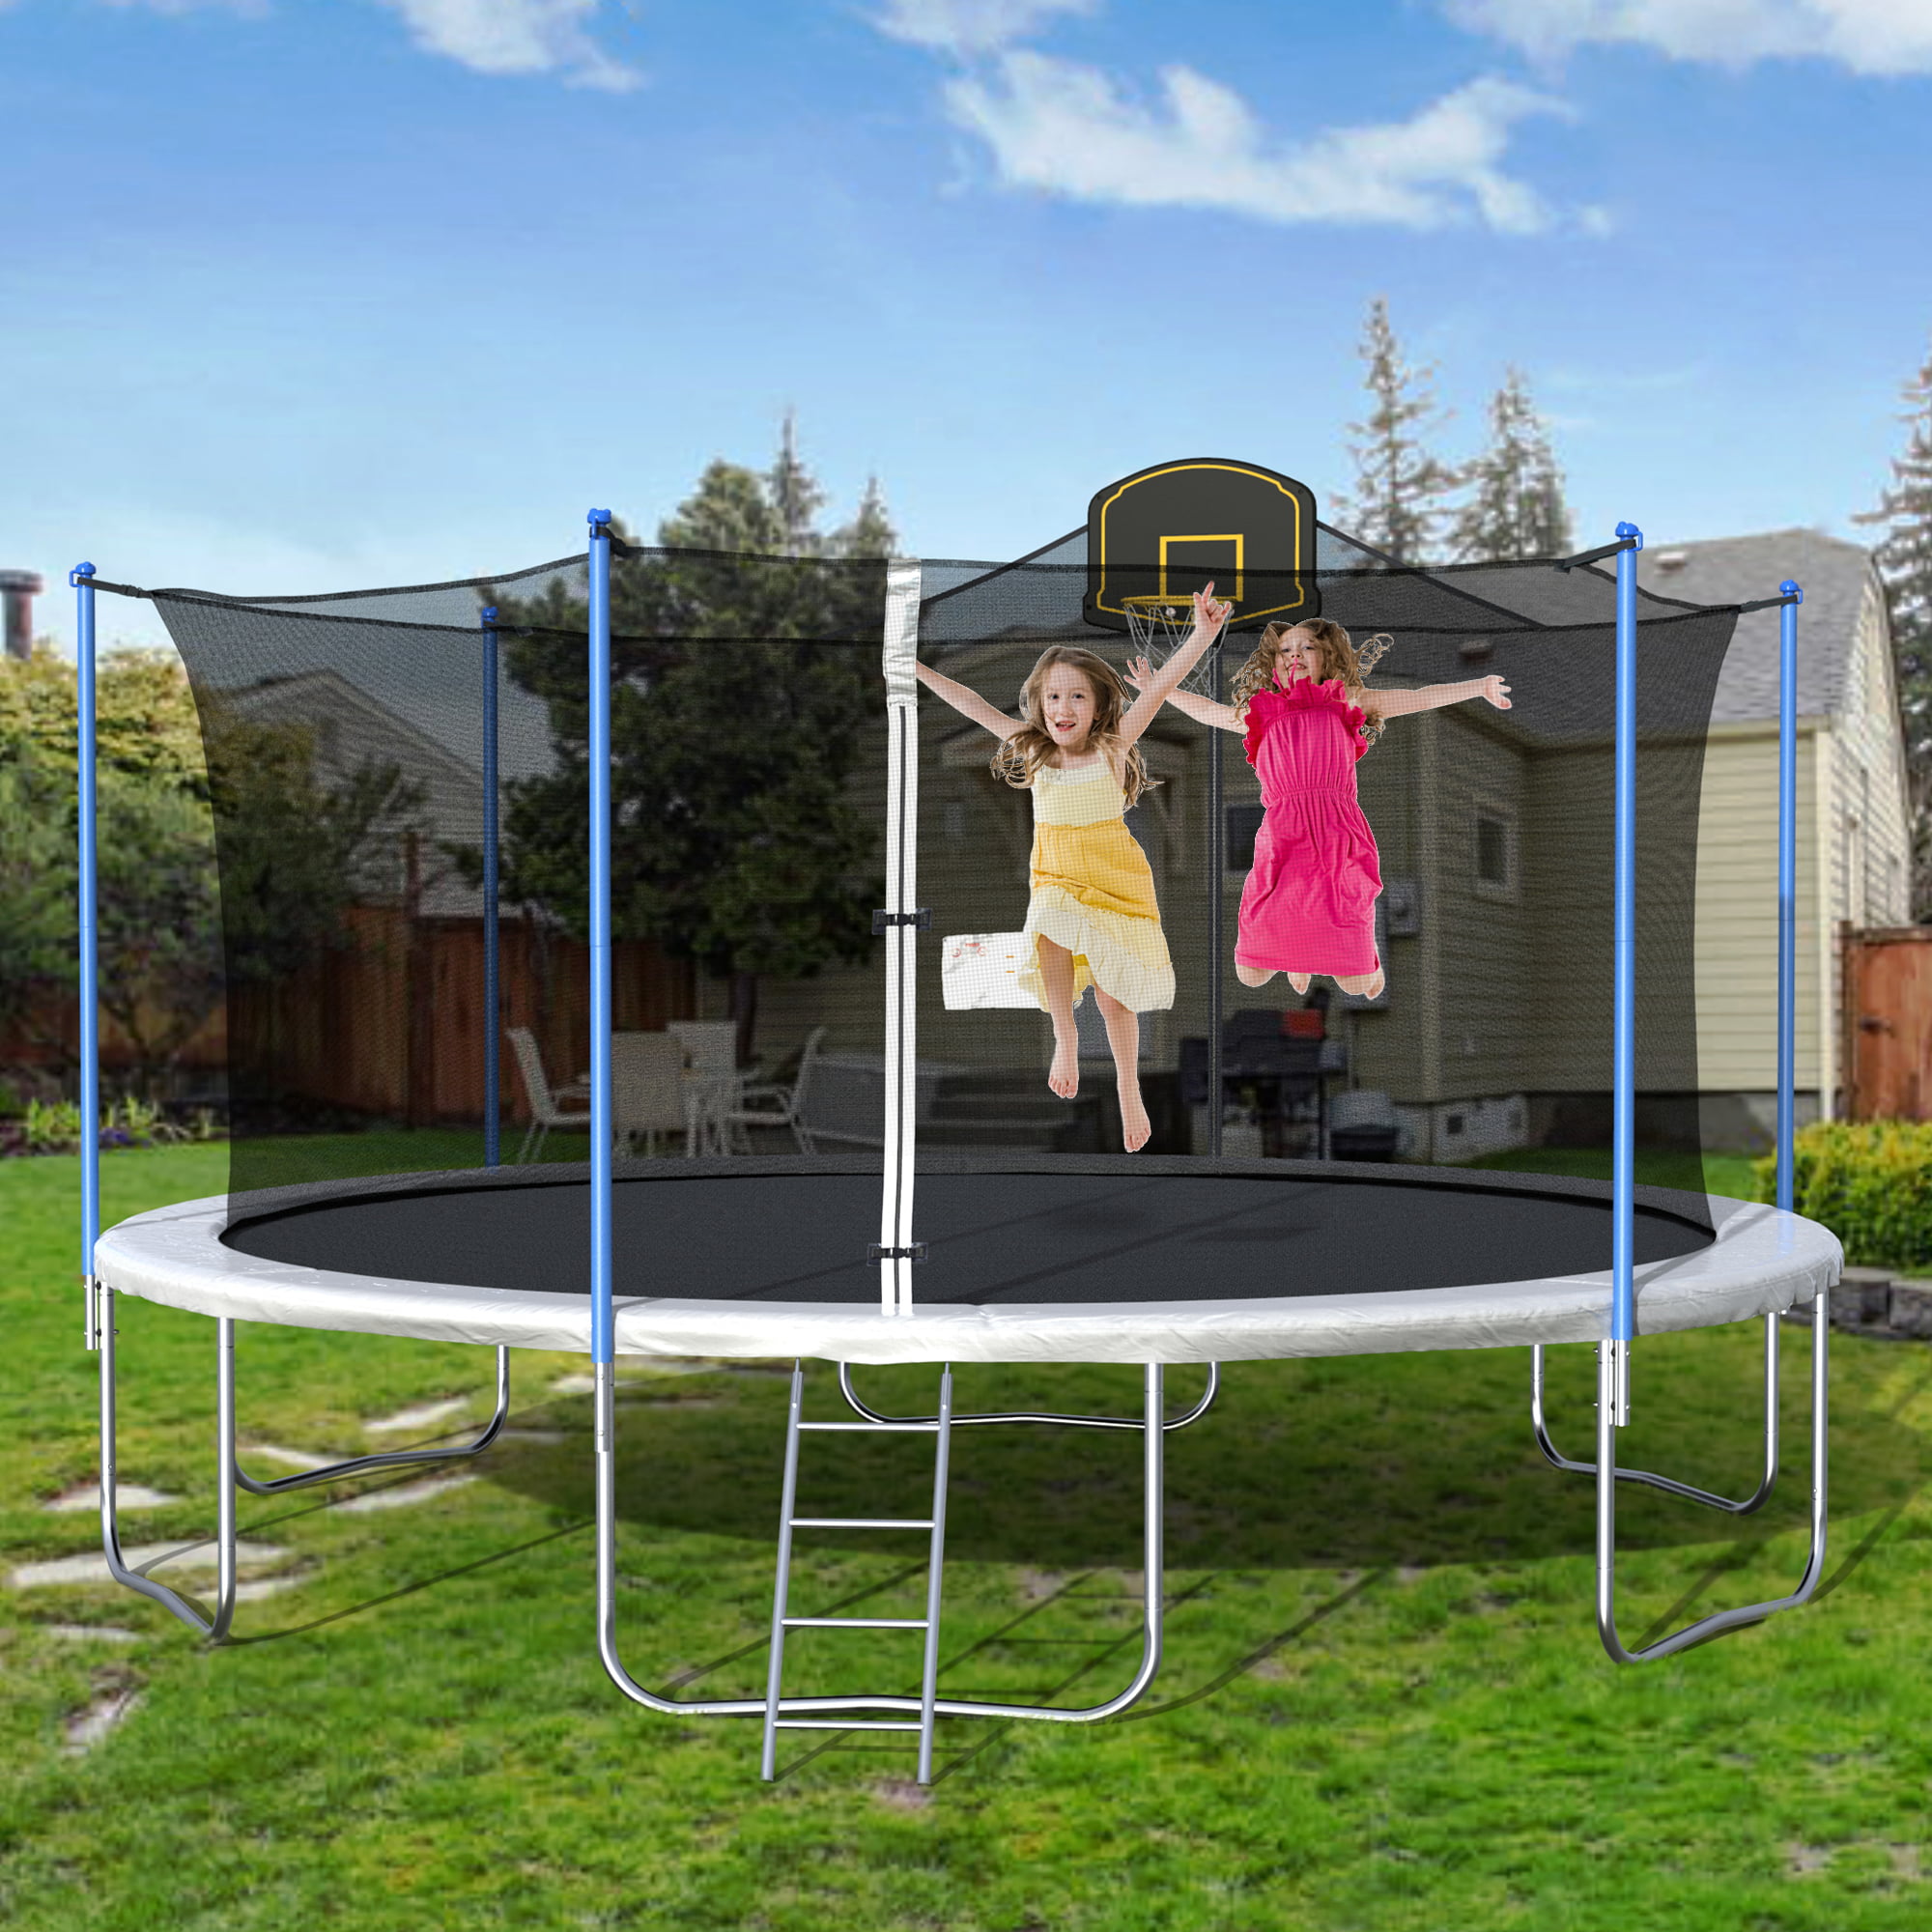 Trampoline with Basketball Hoop for 3-8Yrs Kids, 2021 Upgraded 16FT Trampoline Activity Center w/Backboard Enclosure Net Jumping Mat, Safety Spring Cover Padding, Basketball Hoop & Ladder, S5958